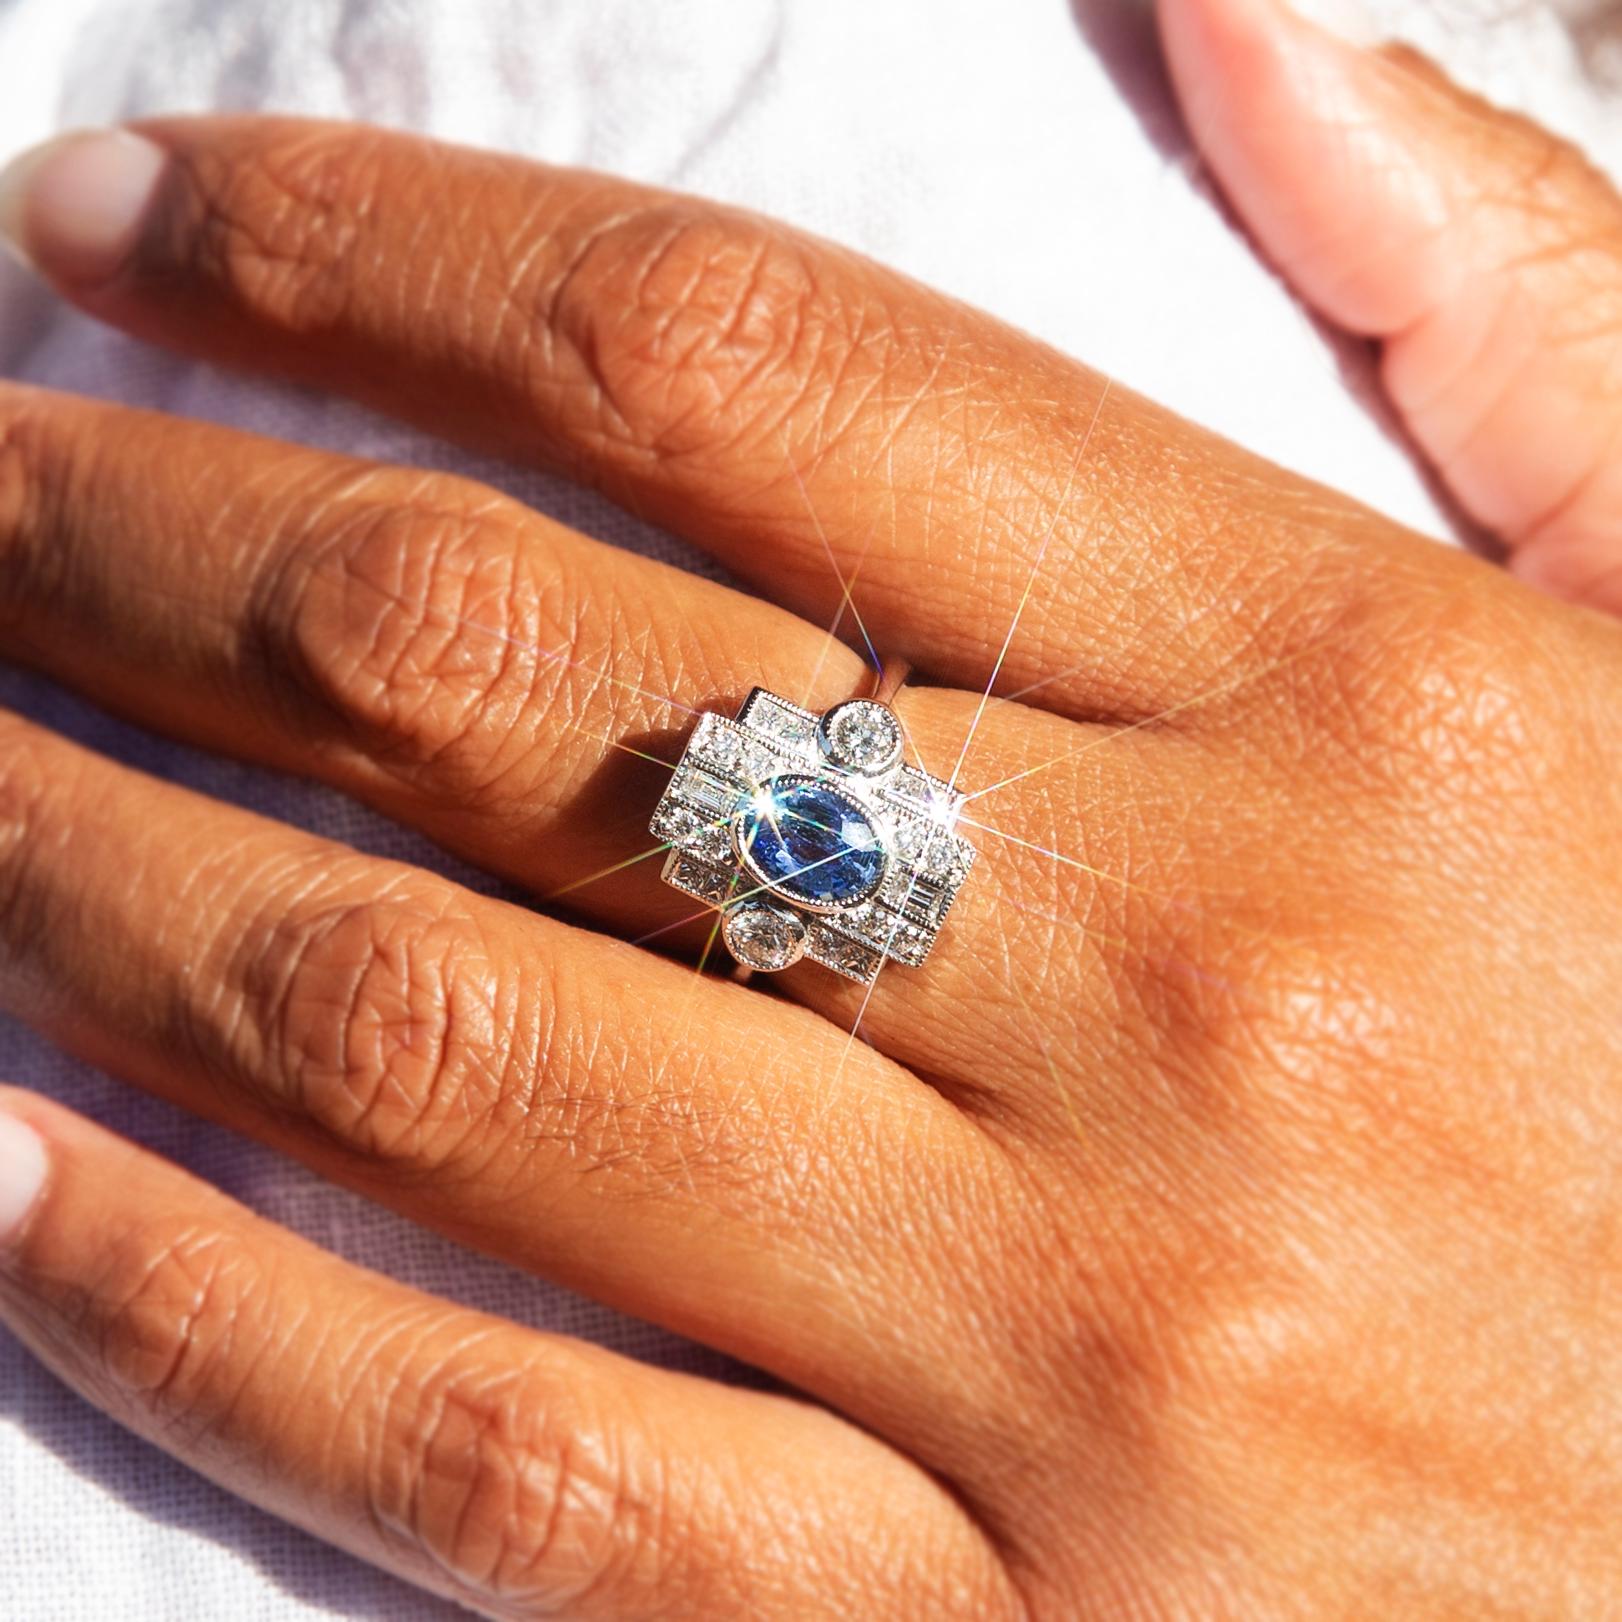 Lovingly recreated in gleaming platinum, this Art deco-inspired contemporary ring features an alluring 1.36-carat natural bright blue Ceylon-type sapphire and is encompassed by 0.71 carats of bright shimmering round brilliant cut diamonds,